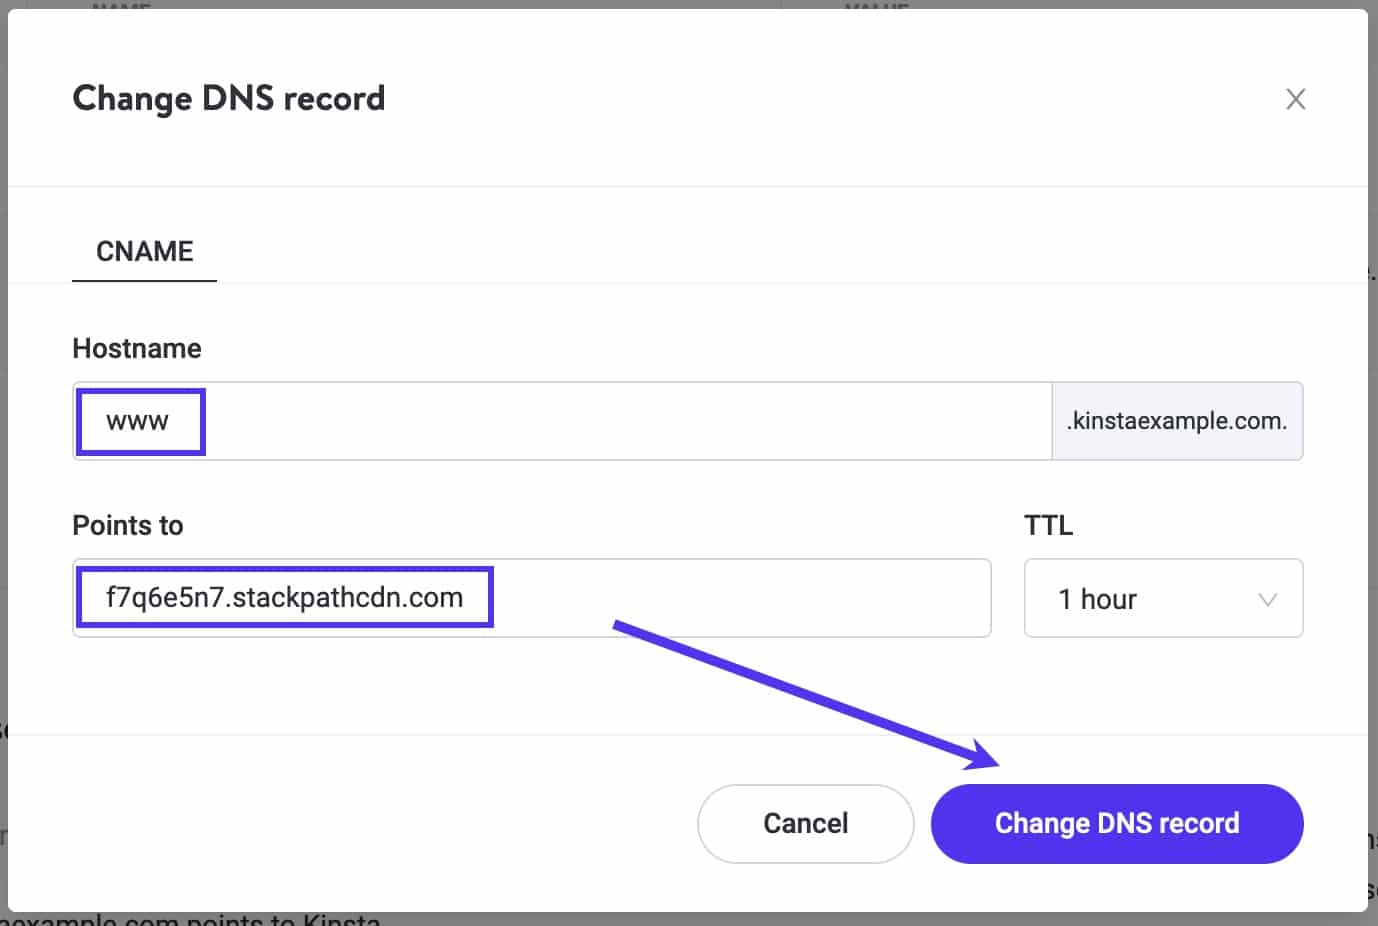 Edit your www CNAME record to point to StackPath.